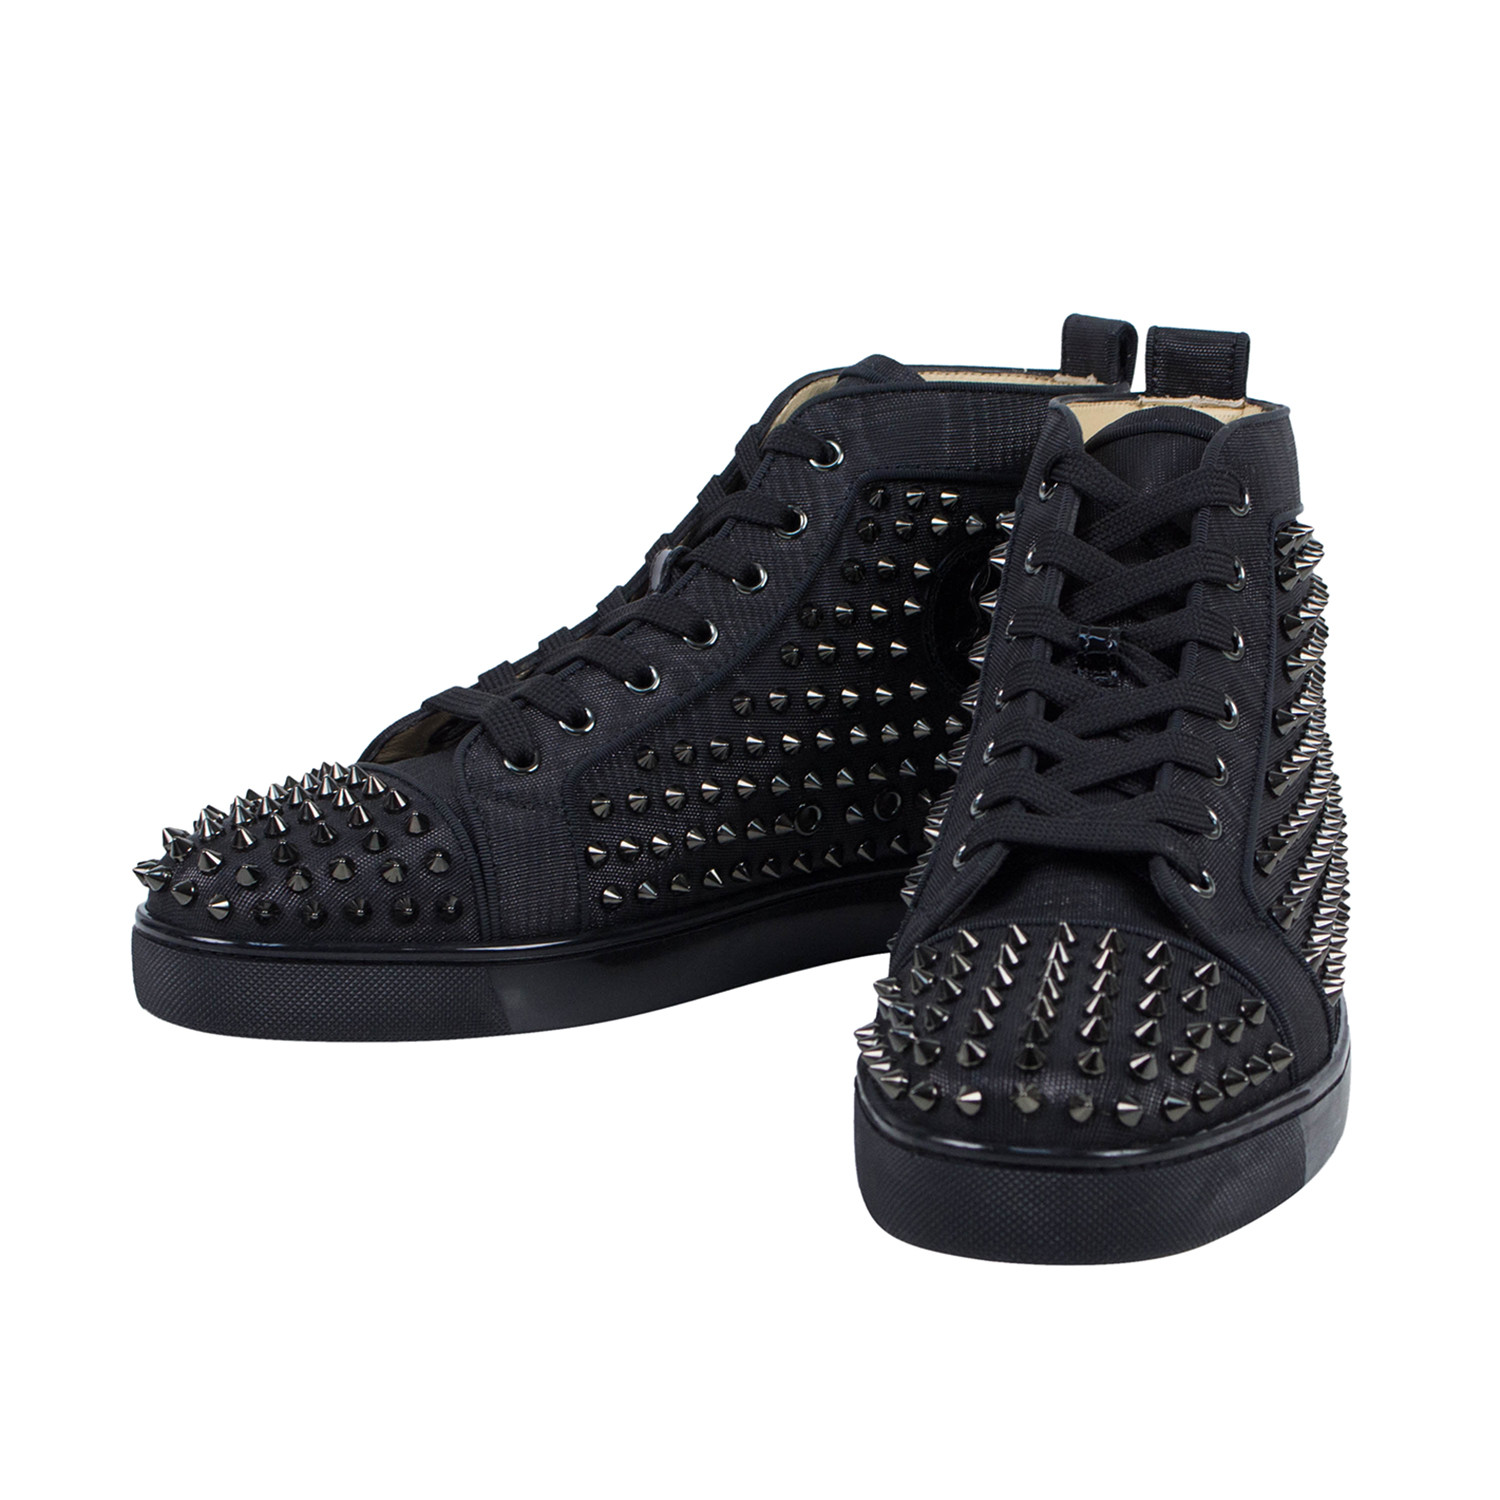 Christian Louboutin Lou Spikes Red Bottoms High Top Sneakers Size 41.5(US  8.5-9)